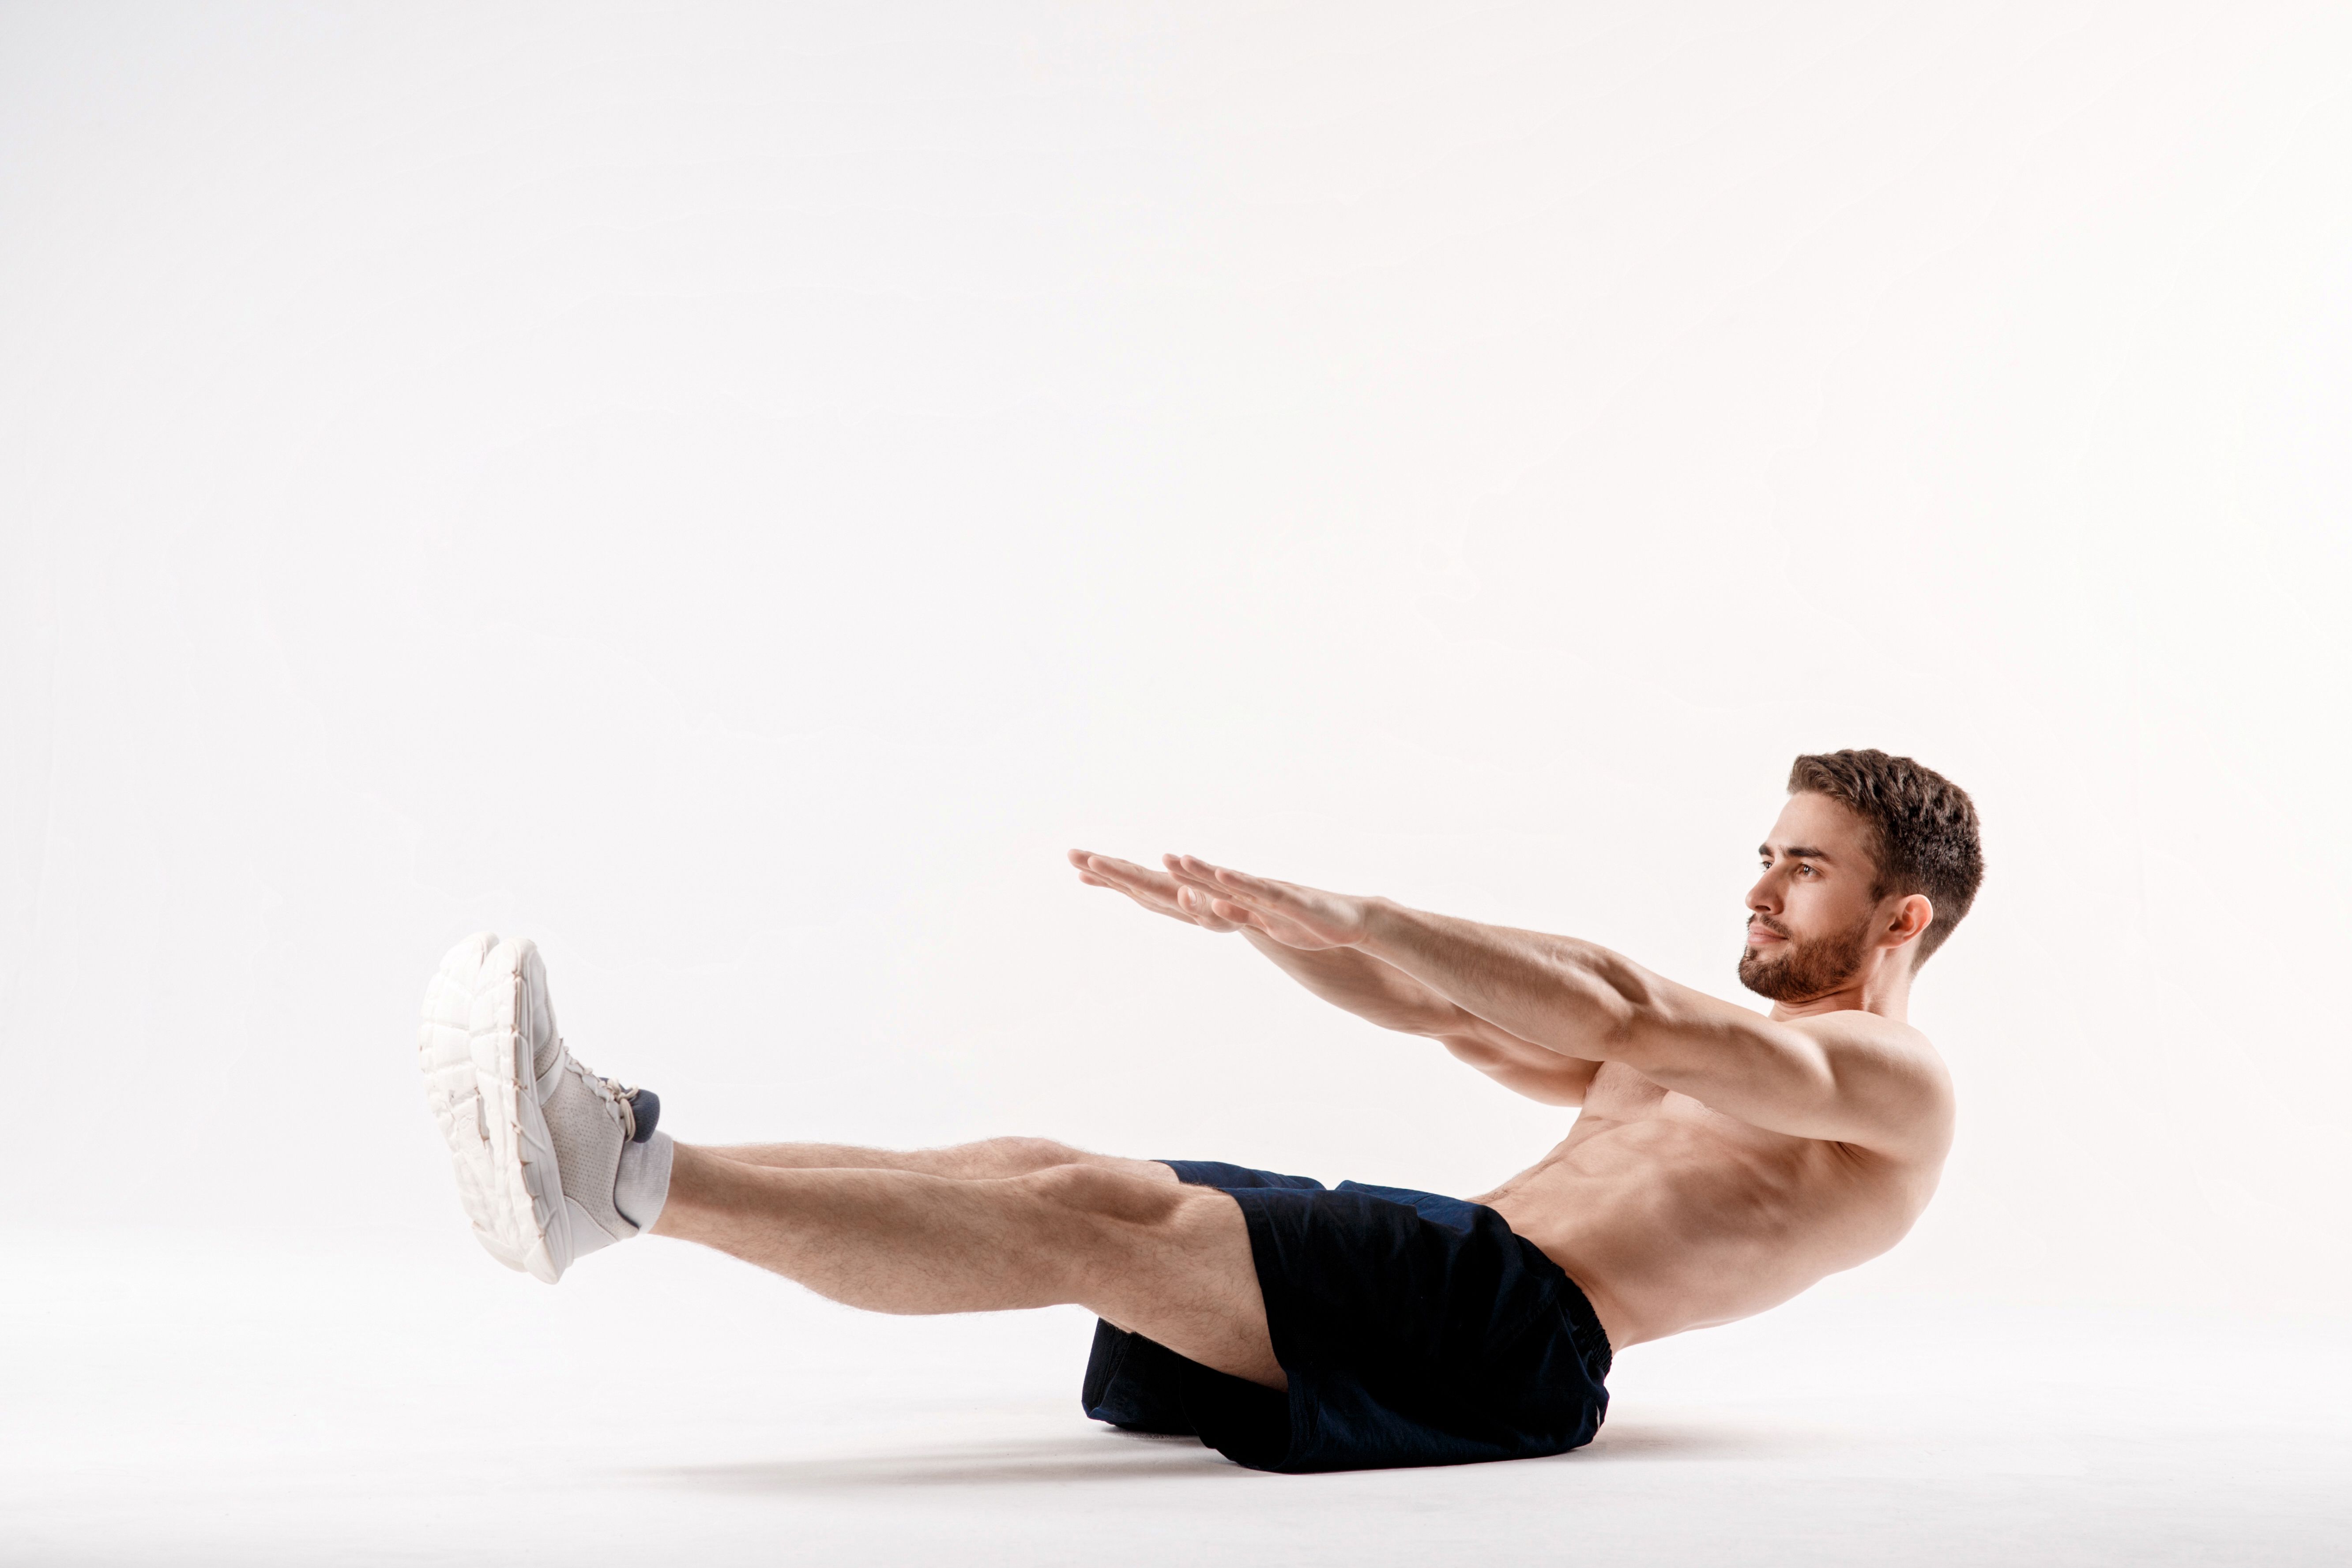 18 Of The Best Ab Exercises And Ab Workouts To Get A Six-Pack